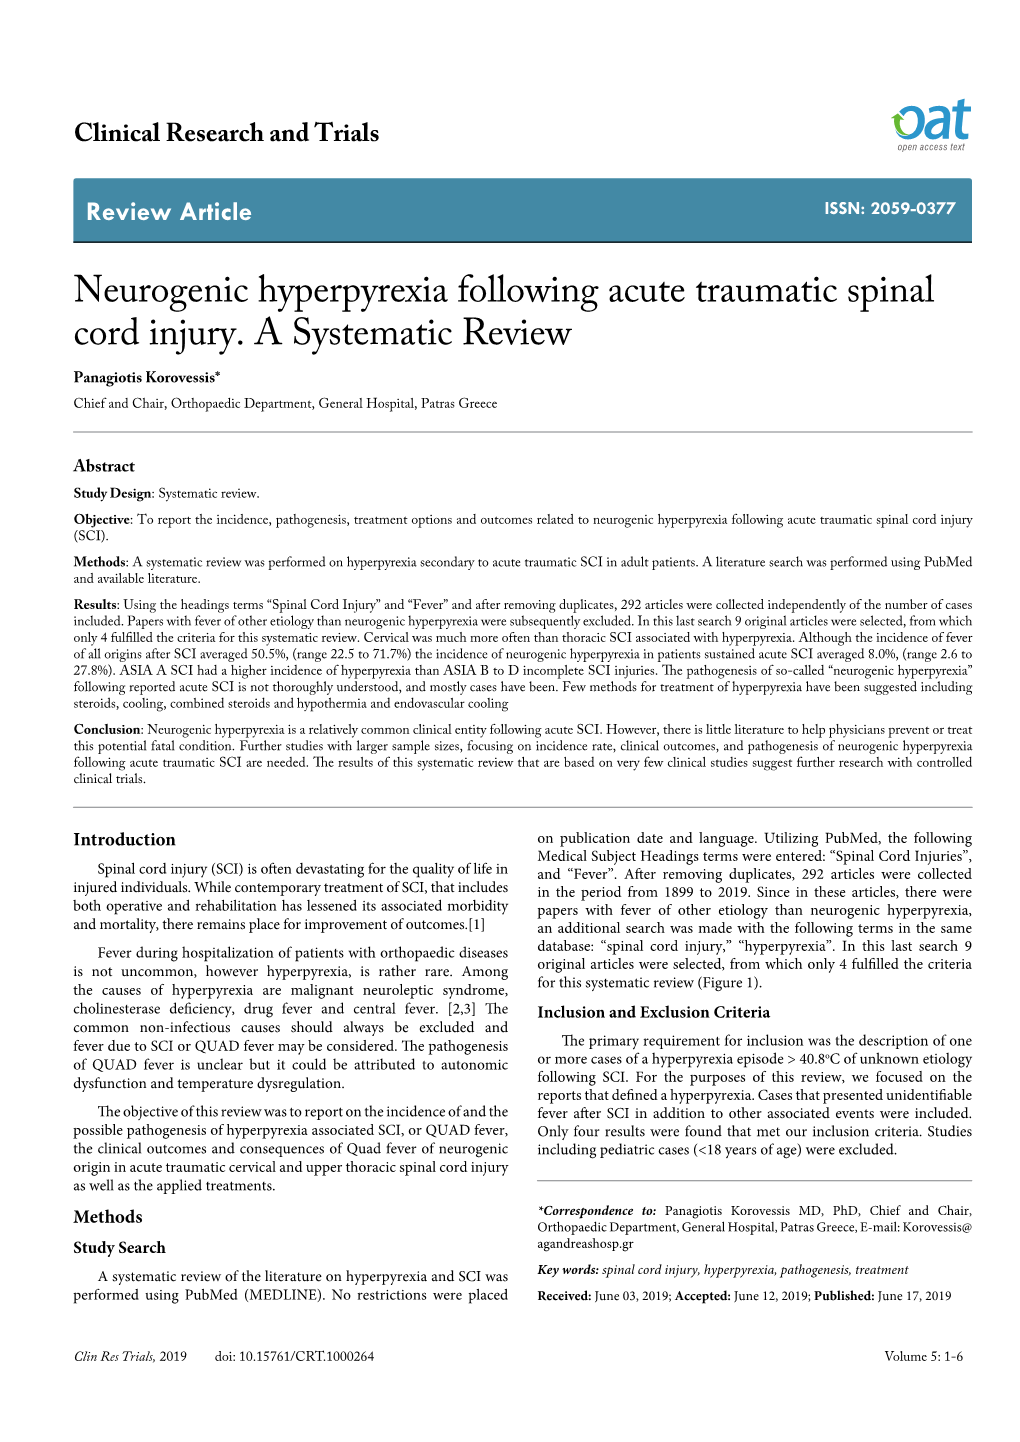 Neurogenic Hyperpyrexia Following Acute Traumatic Spinal Cord Injury. A